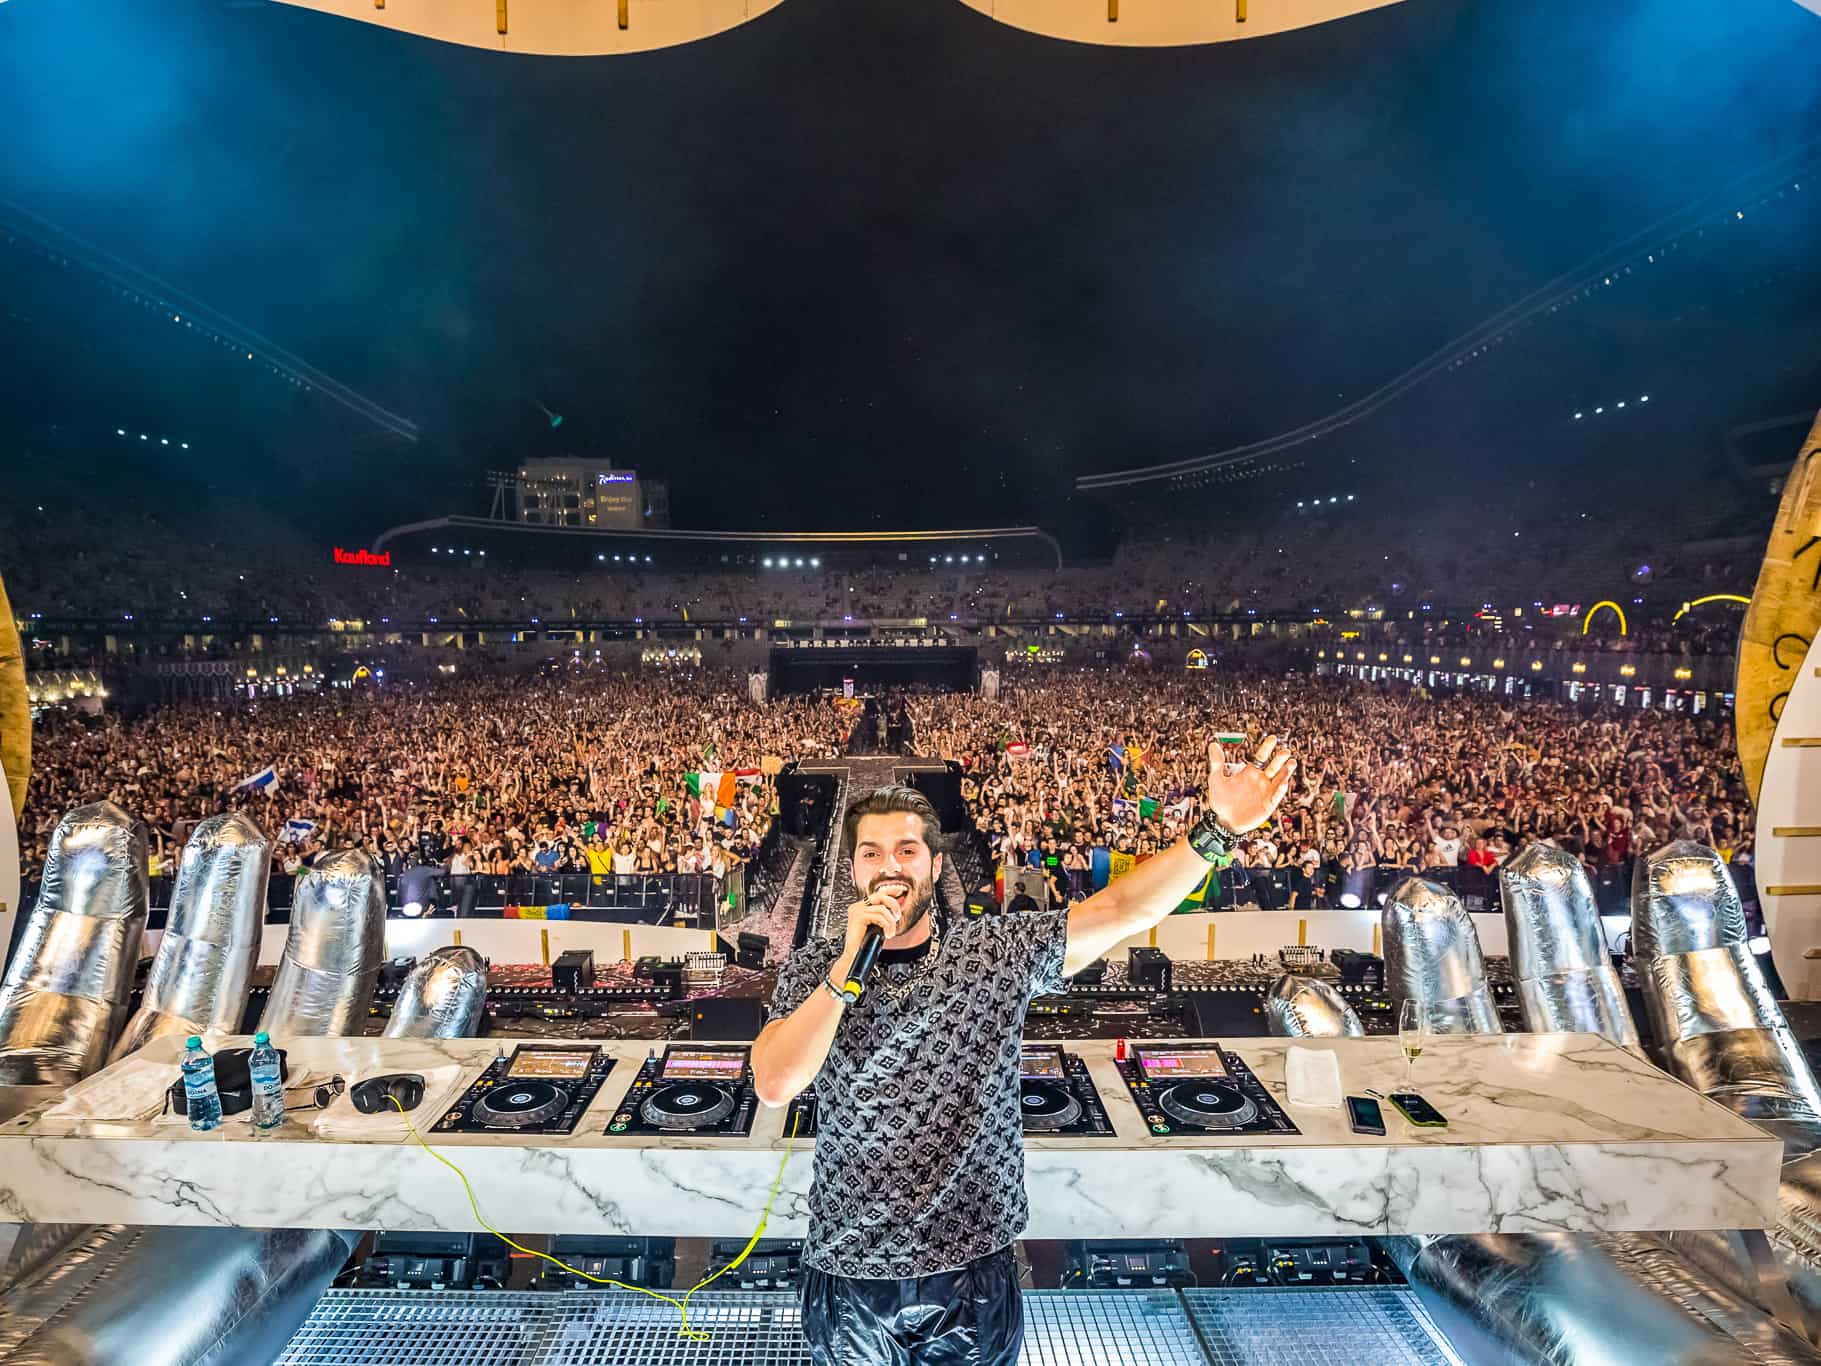 Alok unveils stunning new stage concept at Untold Festival